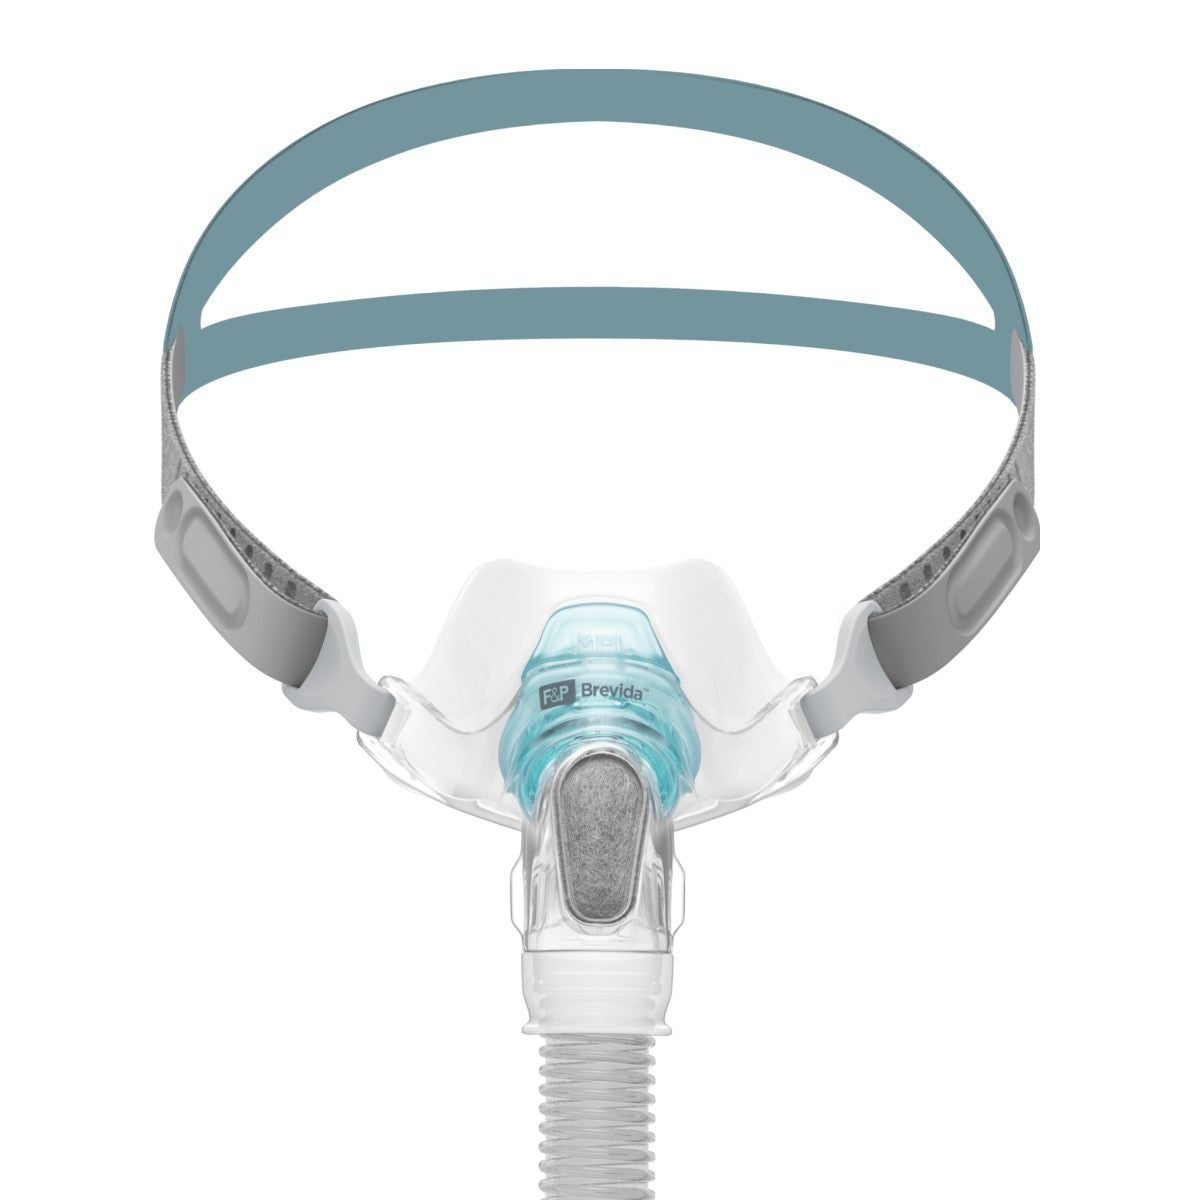 Fisher & Paykel Brevida Nasal Pillow Mask System with Headgear